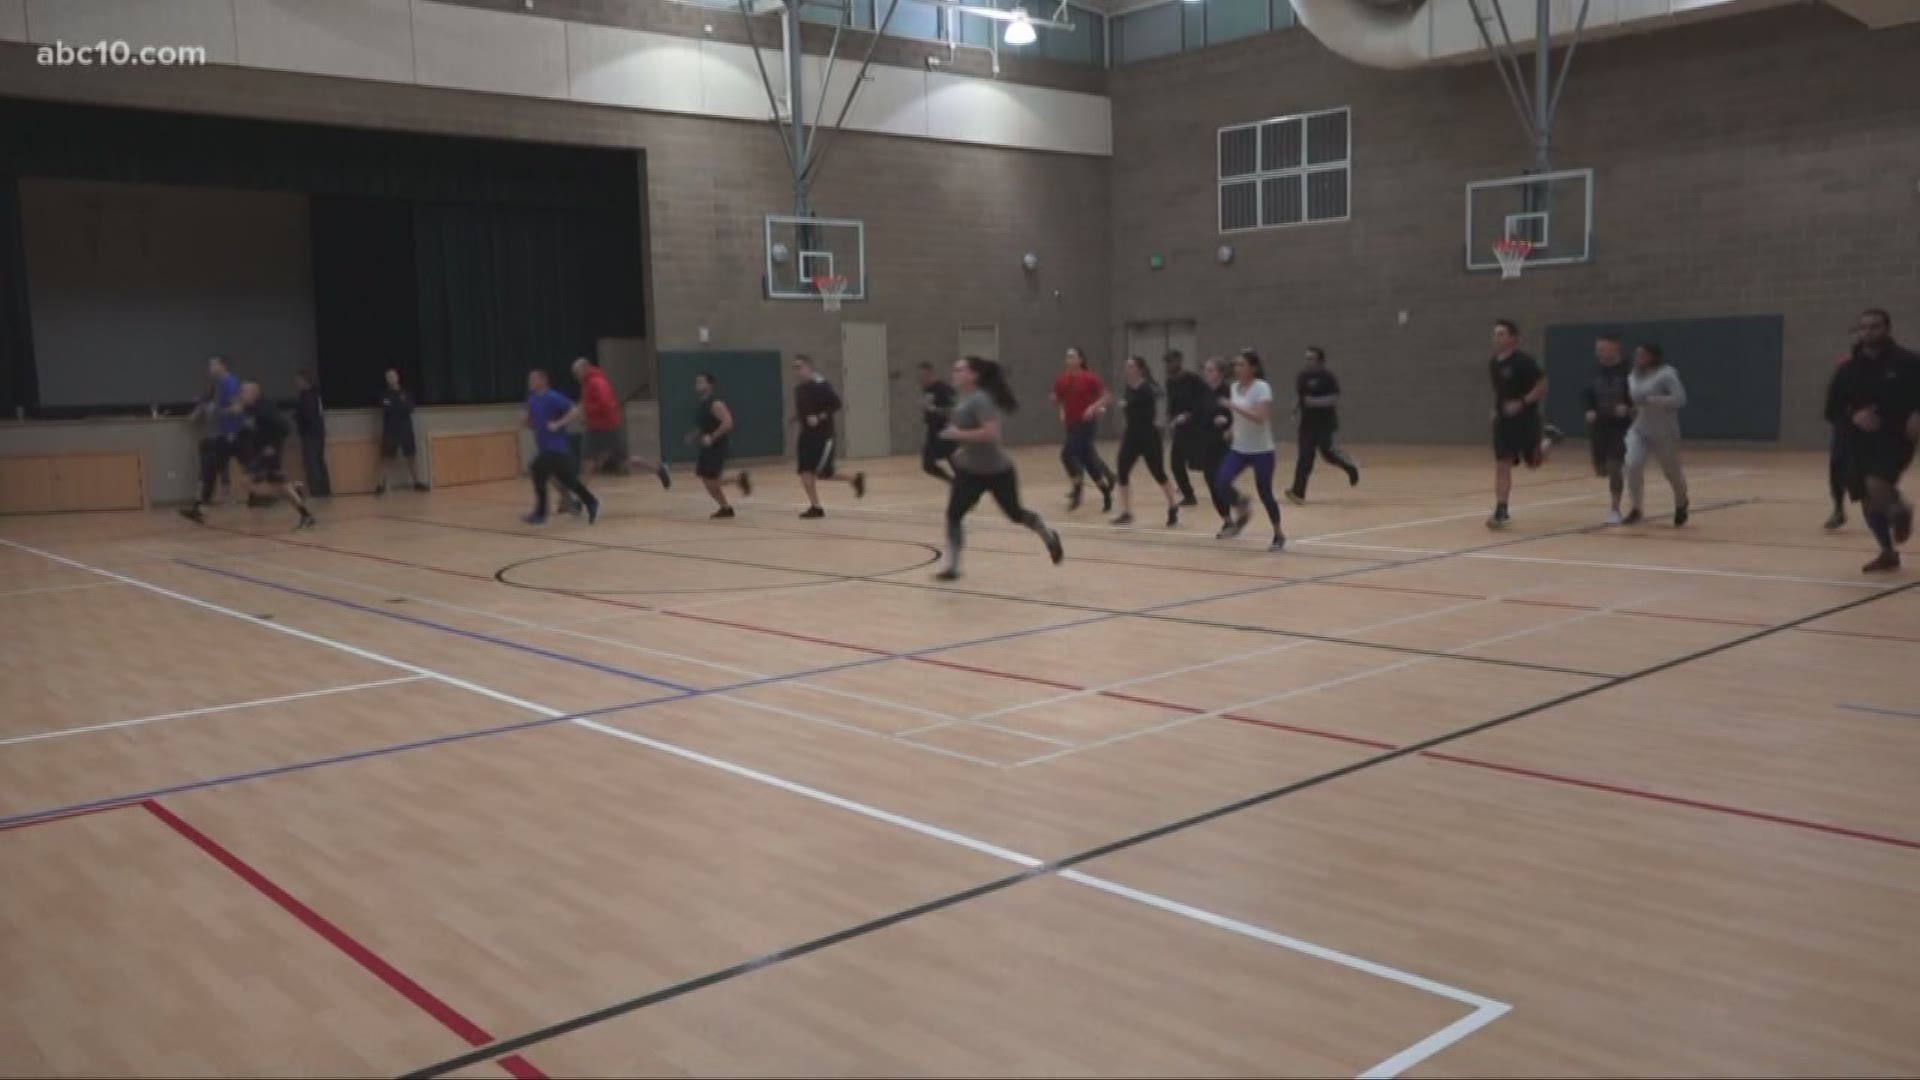 The Sacramento Police department held a special "Workout Wednesday" in honor of fallen Davis Police Officer Natalie Corona.